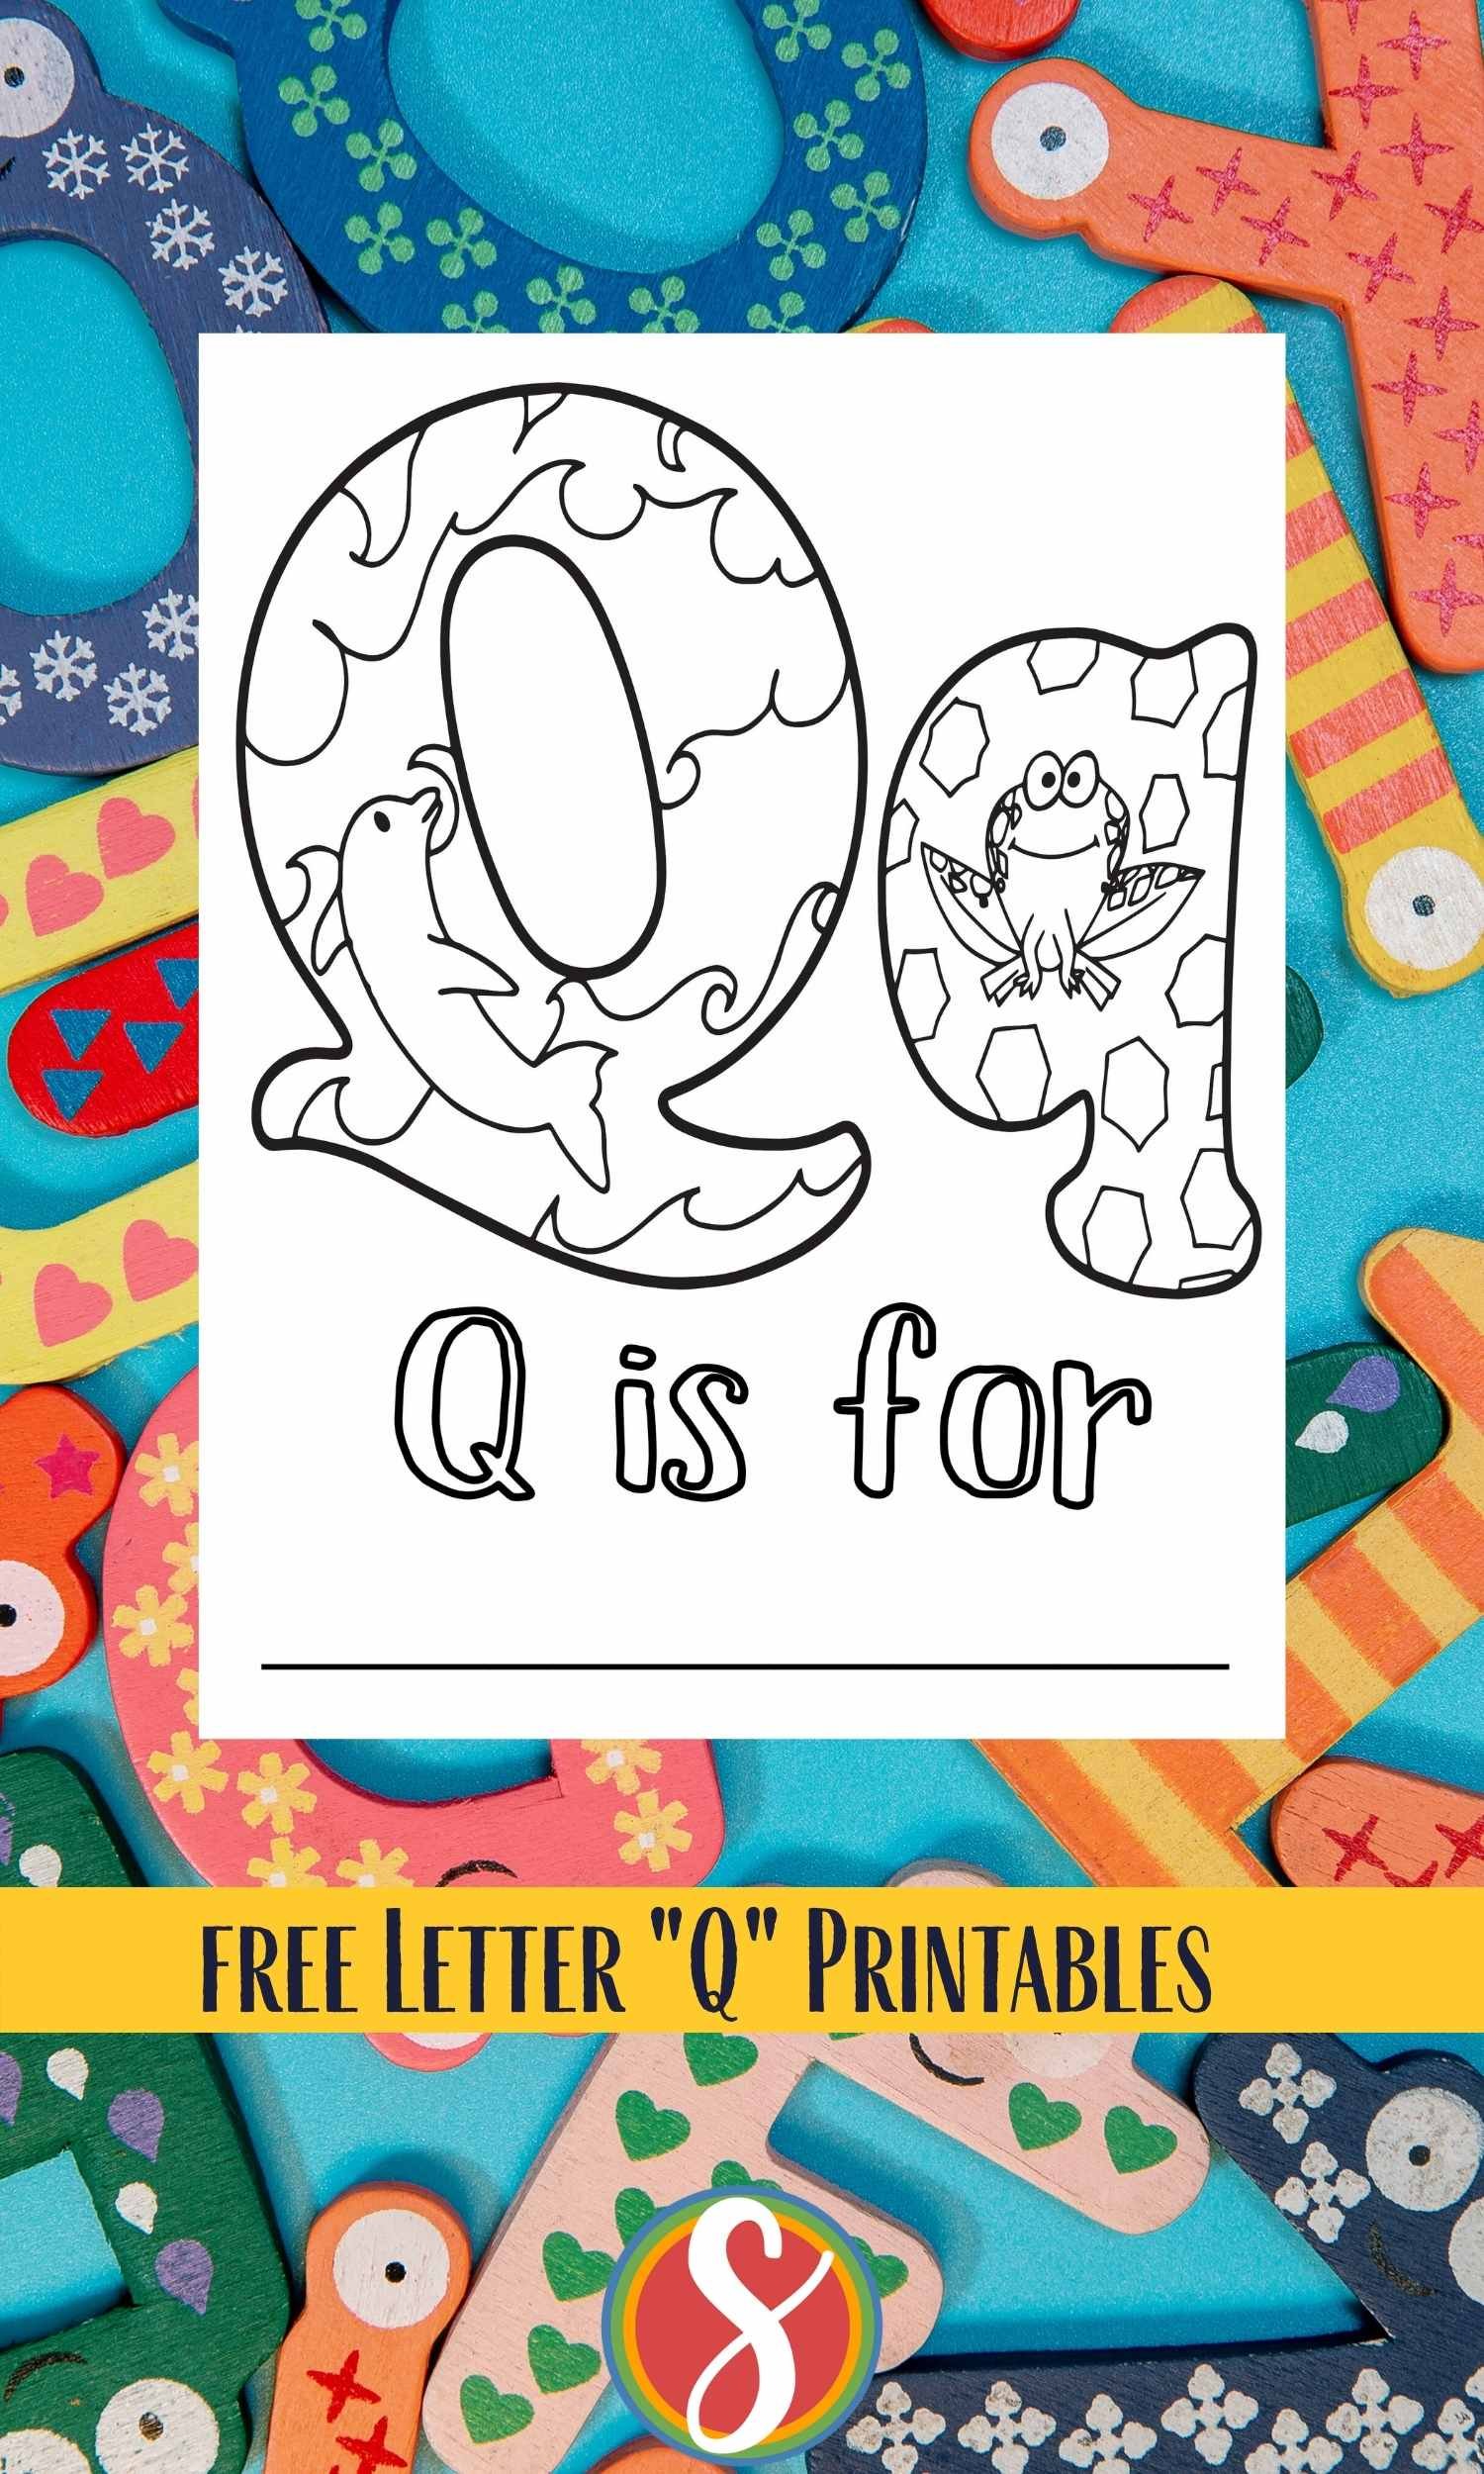 Bubble letter Q with dolphin inside and bubble letter q has frog inside